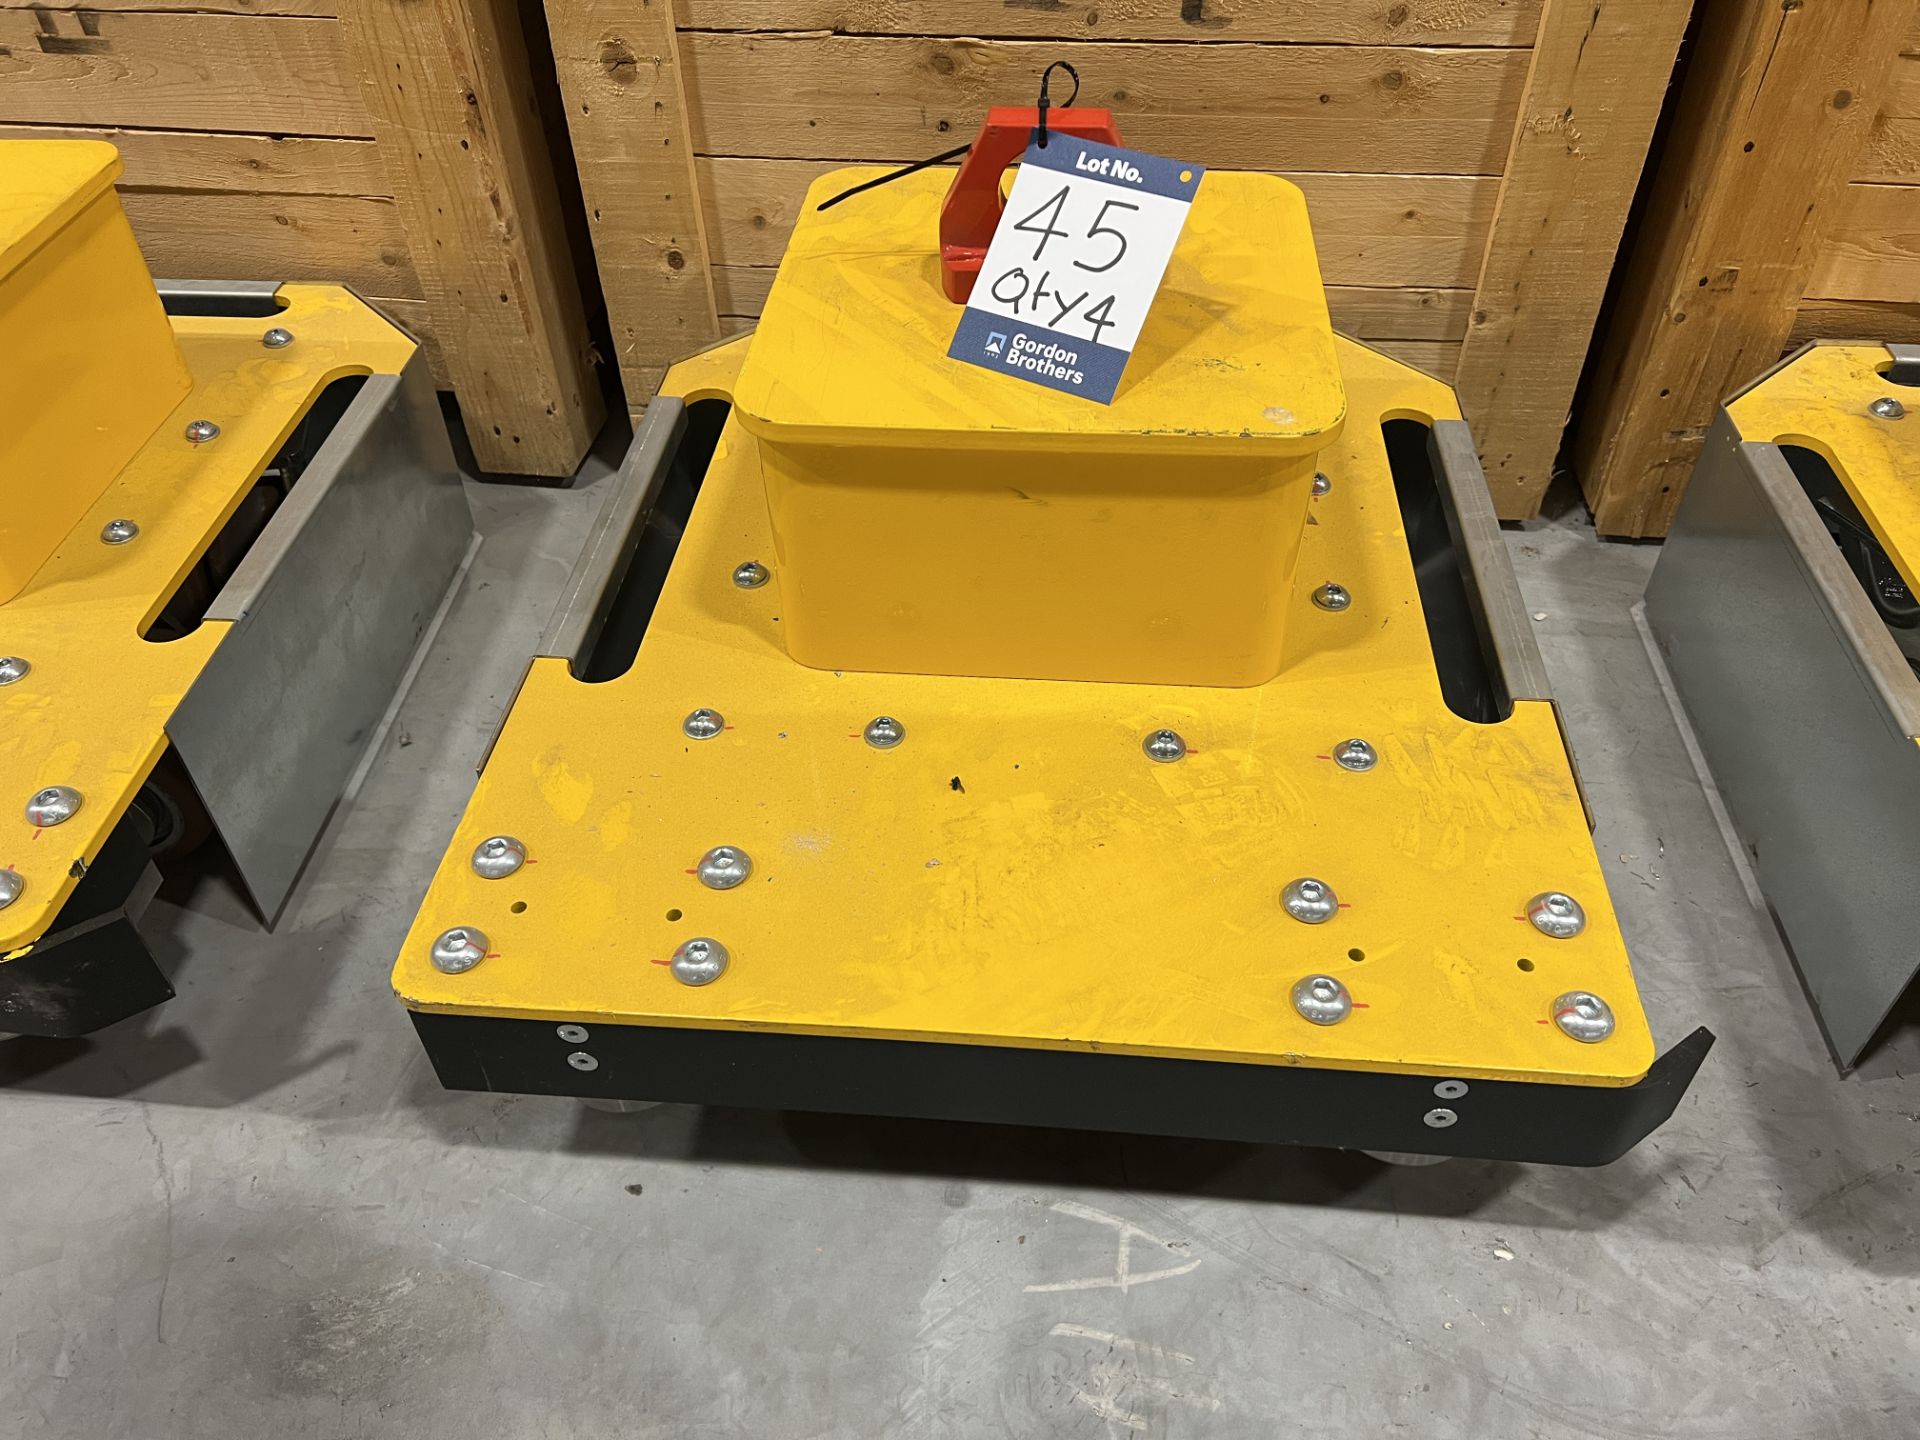 Heavy duty skates (2021) from lot 21 the Tracoinsa Systems UK conveying system this lot will - Image 2 of 2